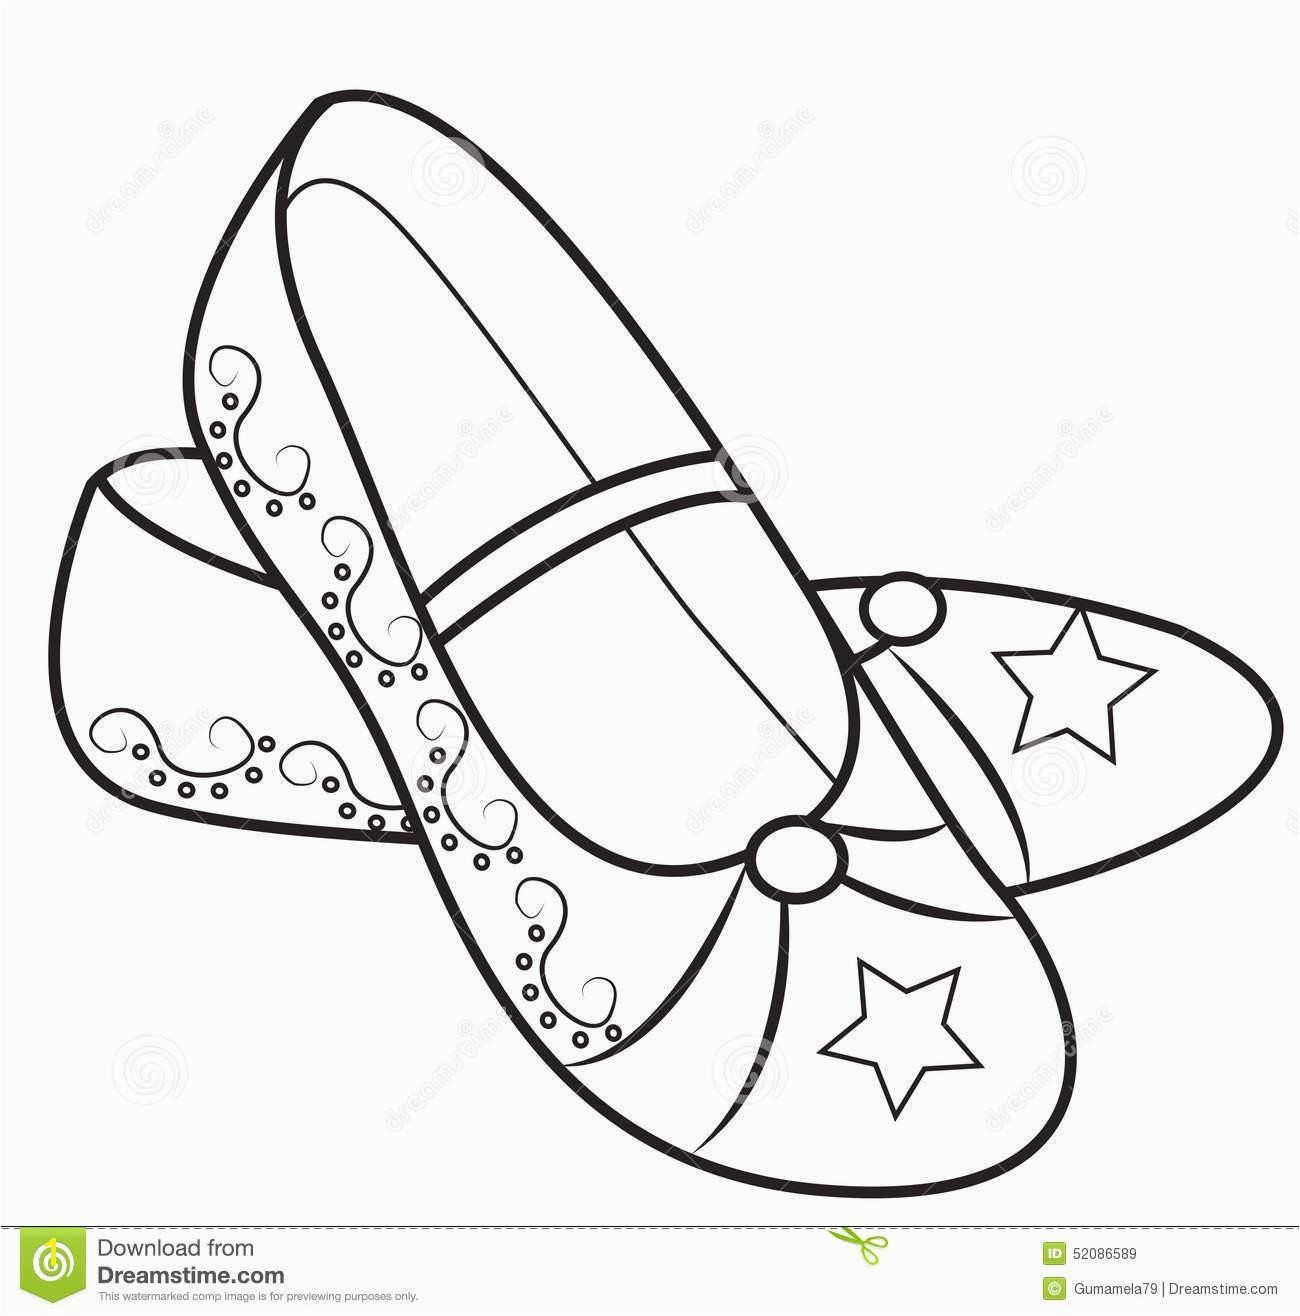 Big Shoe Coloring Page Shoes Pages COLORING PAGES